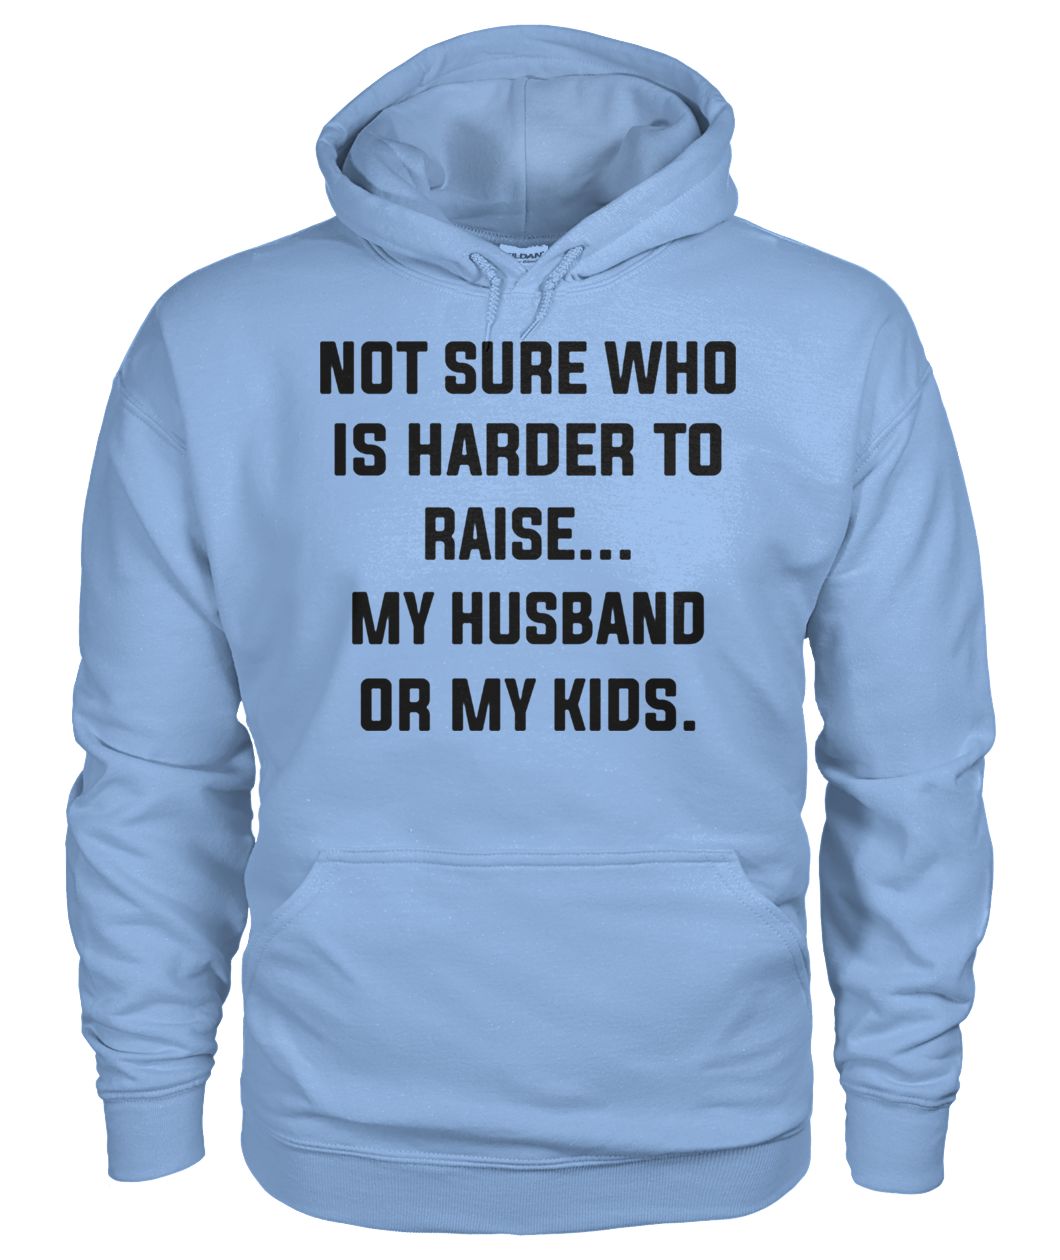 Not sure who is harder to raise my husband or my kids gildan hoodie